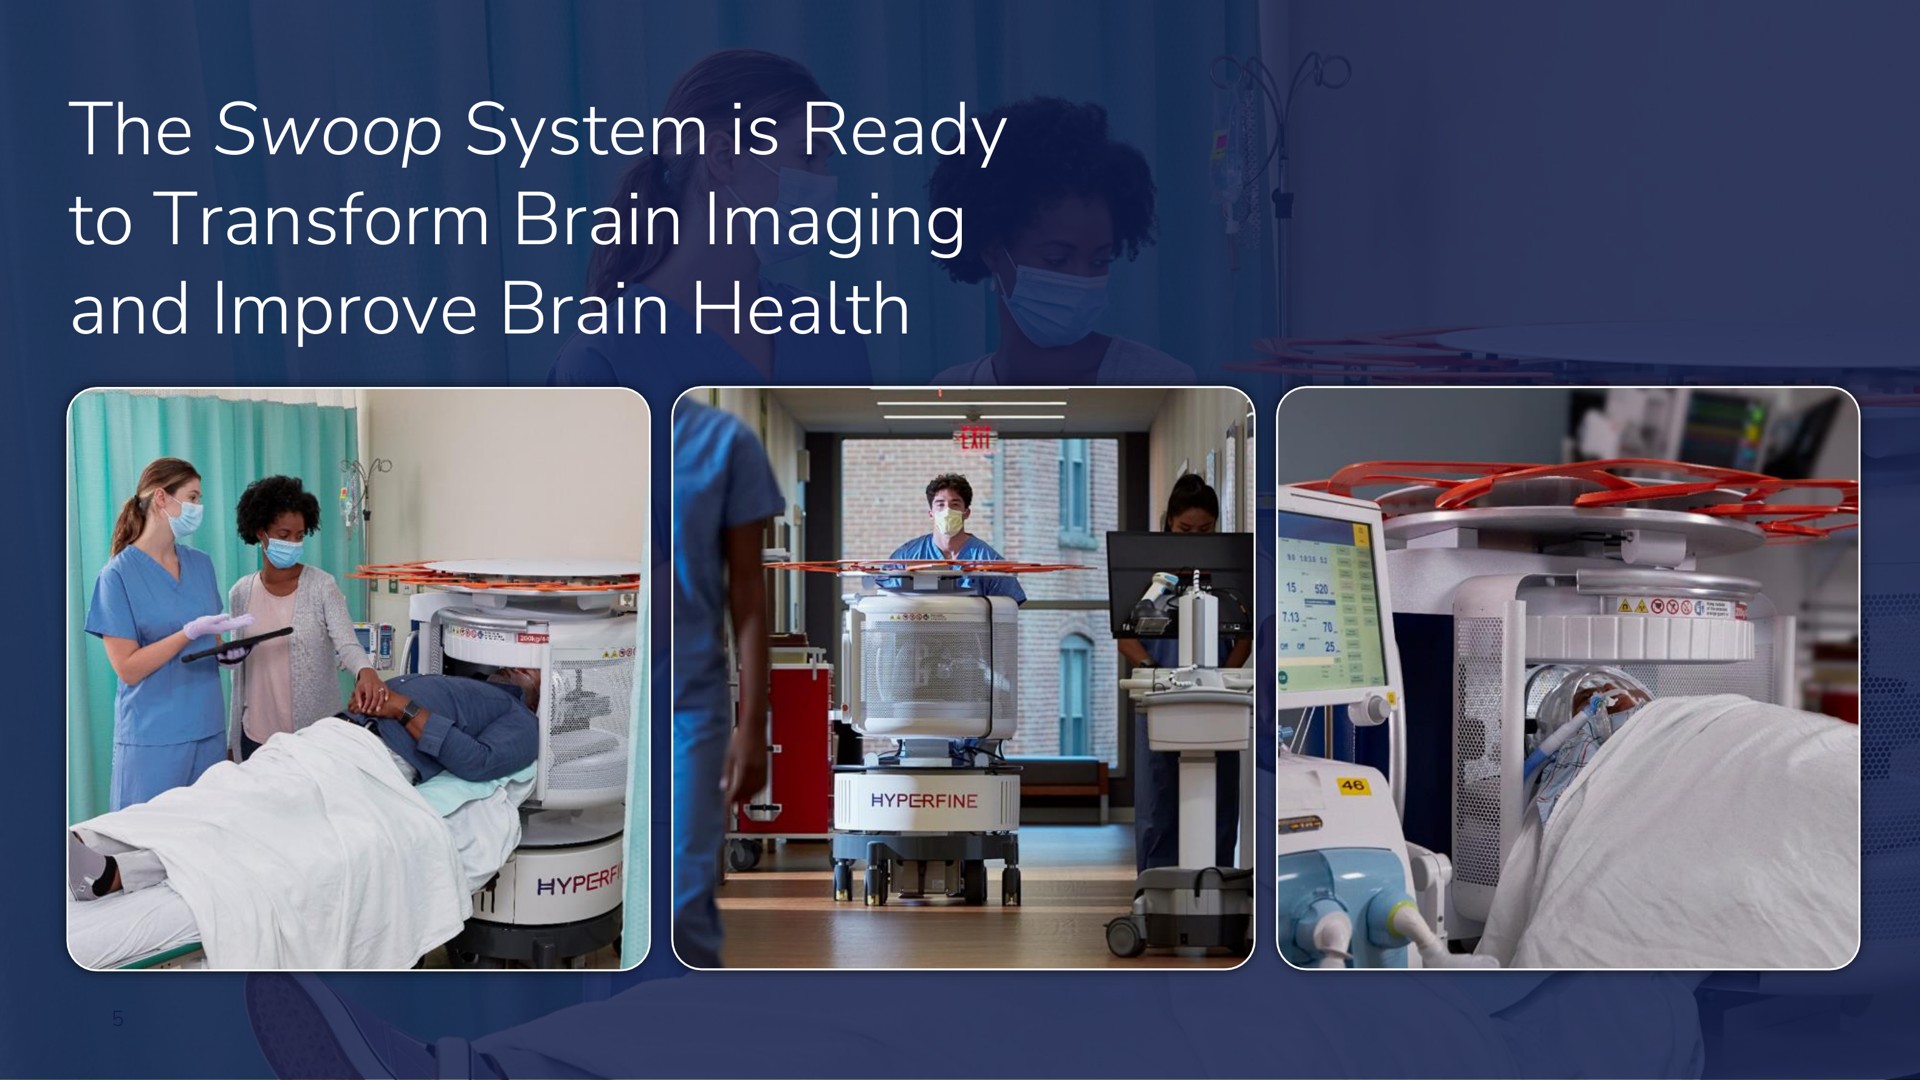 the swoop system is ready to transform brain imaging and improve brain health | Hyperfine